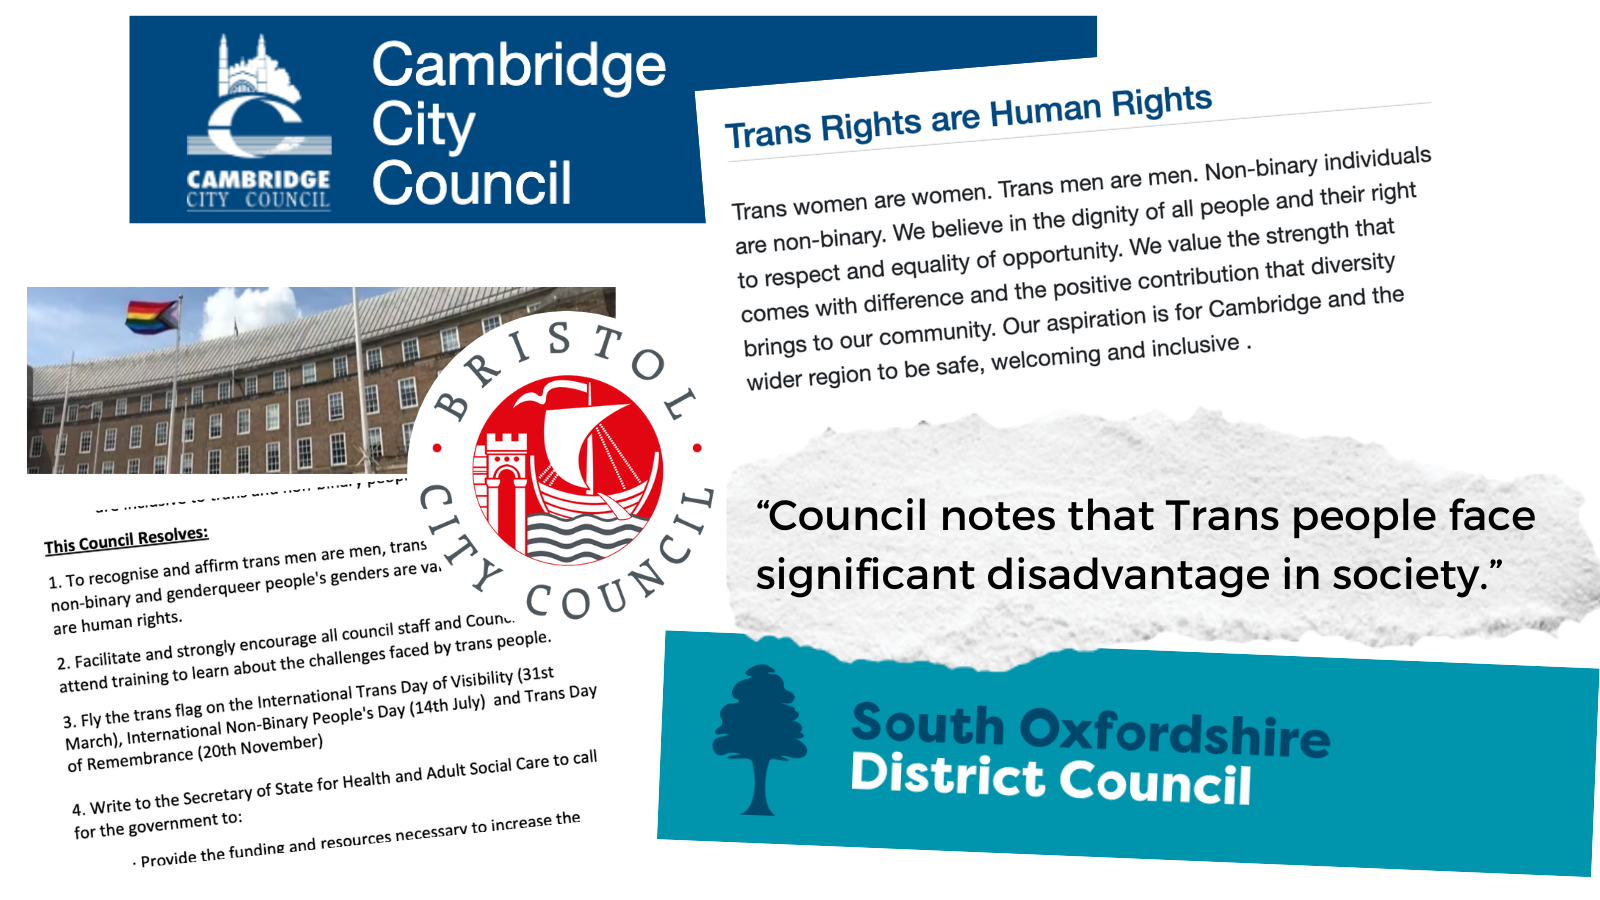 Quotes from motions made by councils in Cambridge, Bristol and South Oxfordshrie